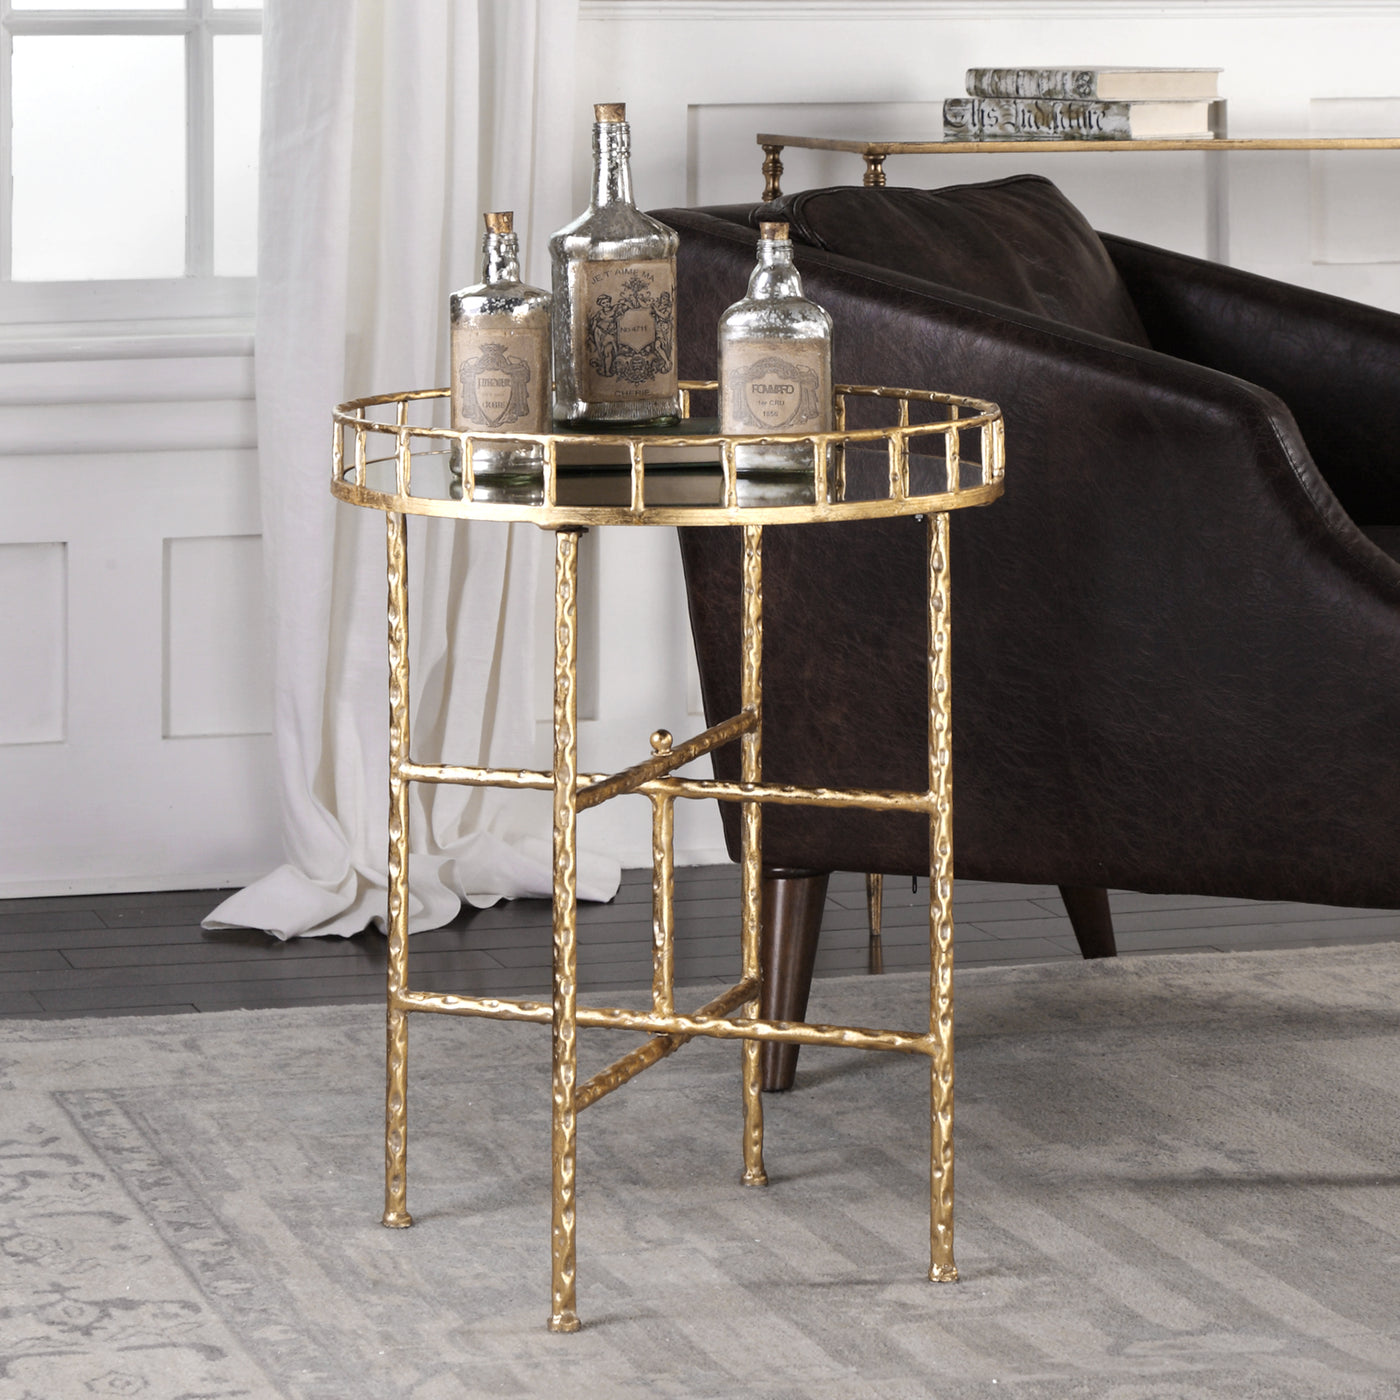 Add A Touch Of Glam With This Accent Table Featuring A Mirrored Tray Styled Top On A Cross Bar Base Finished In Bright Gol...